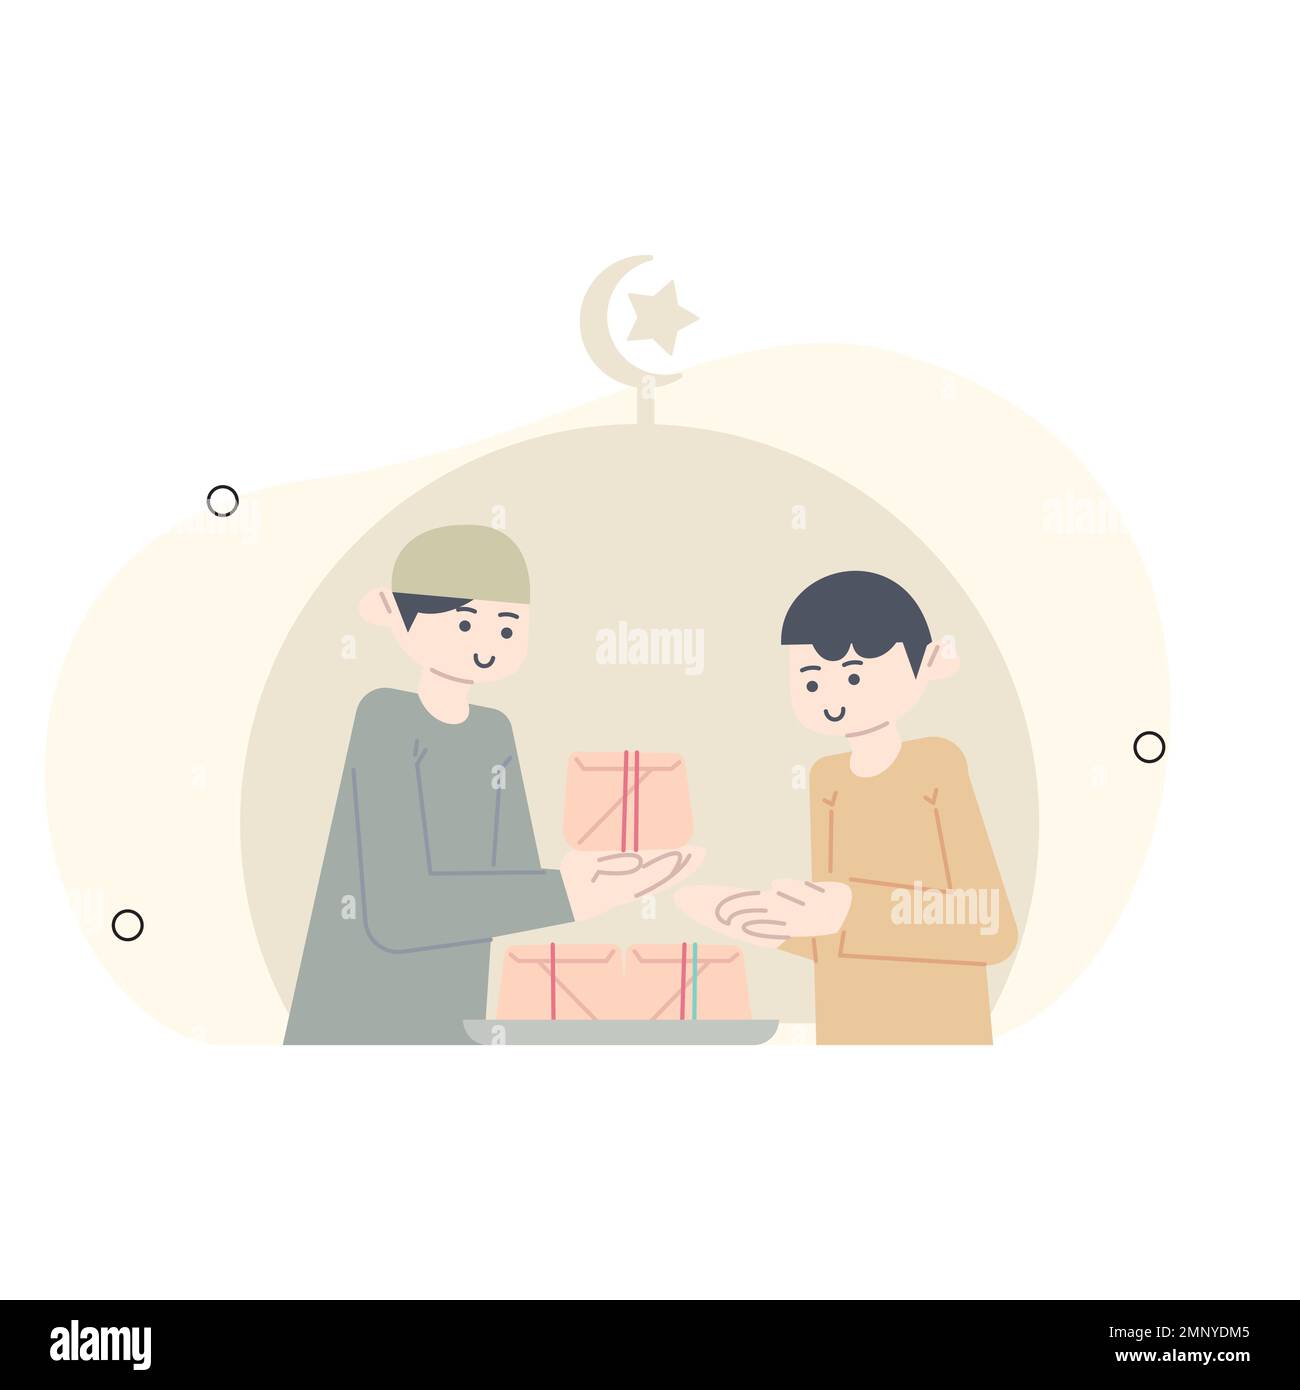 a man who gives rice to break the fast. Ramadan illustration. Giving rice packs to people who are fasting. Stock Vector